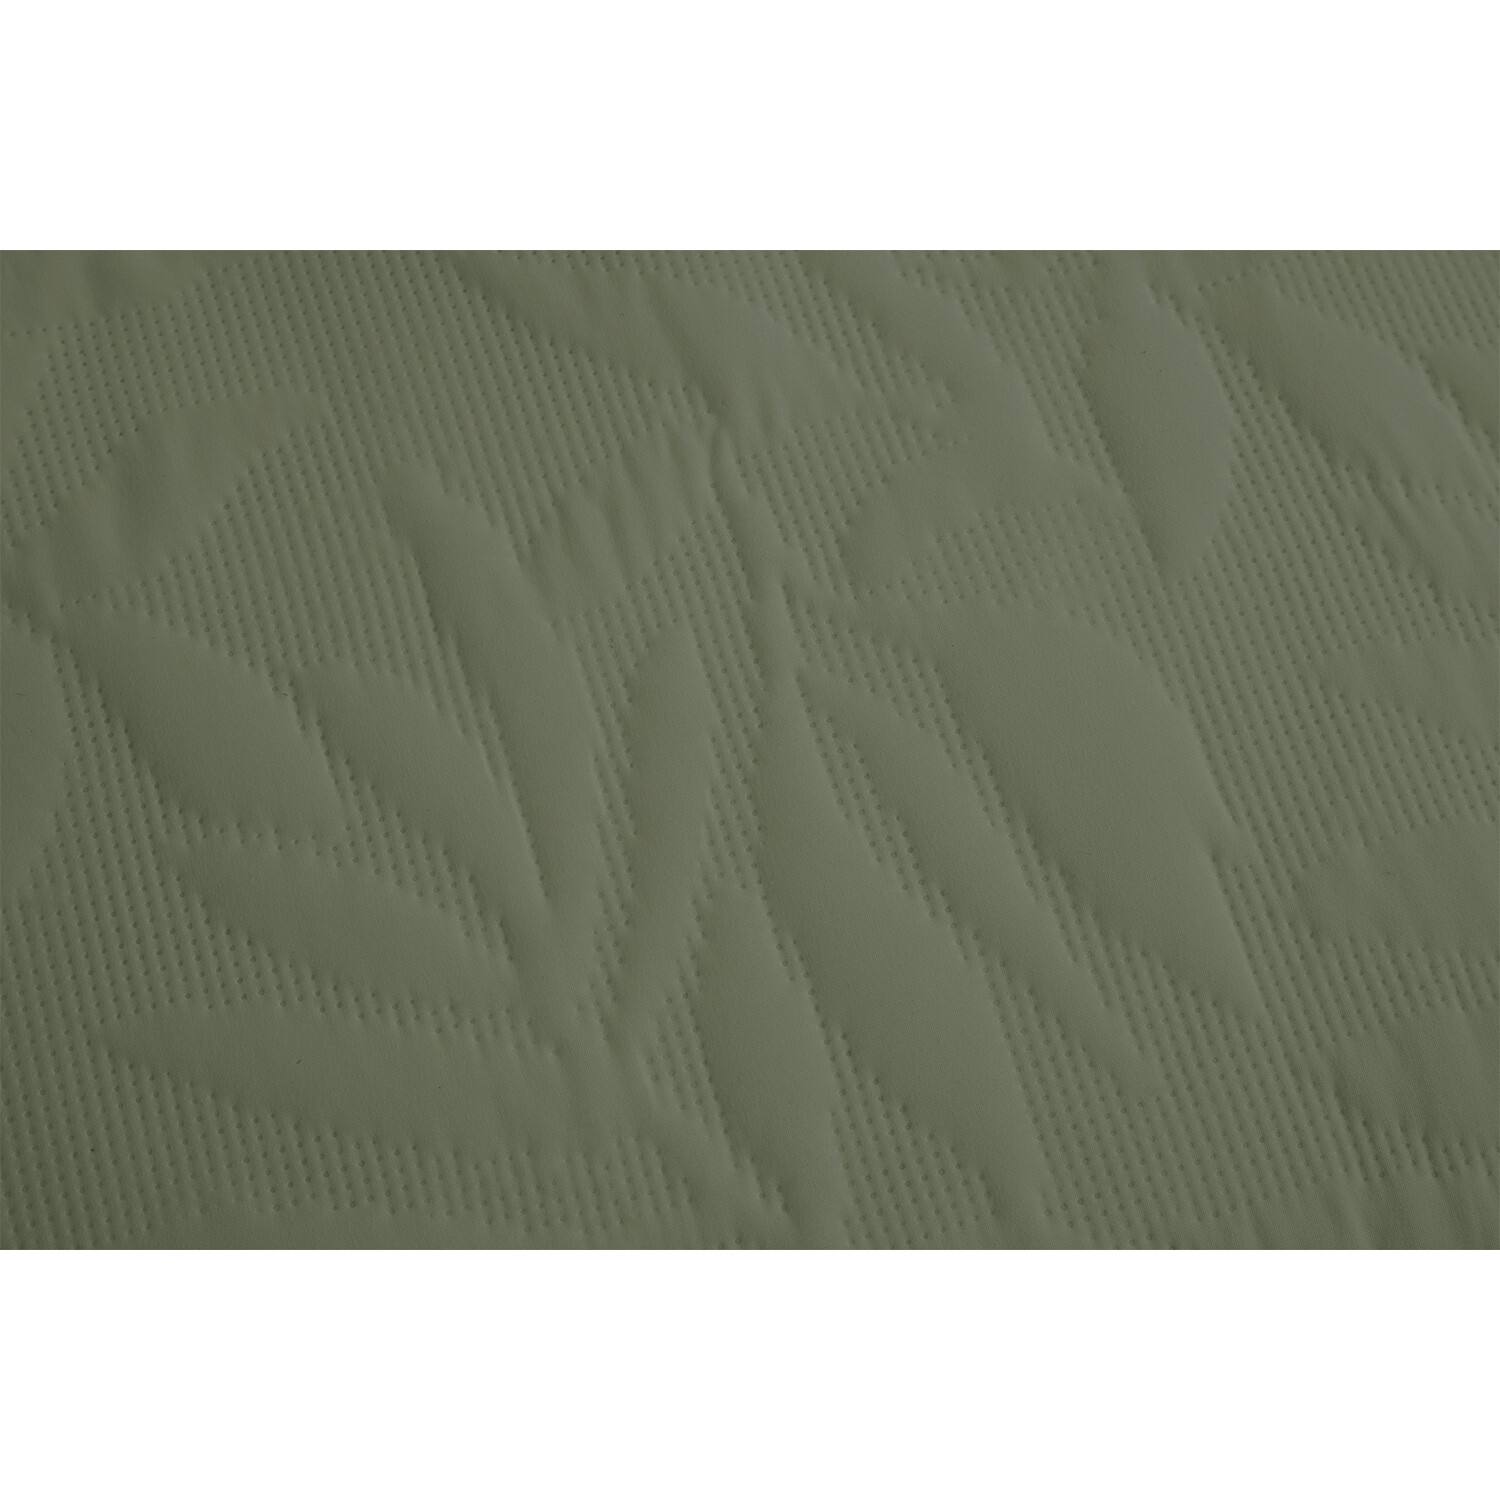 Avery Leaf Duvet Cover and Pillowcase Set - Olive Green / King Image 4